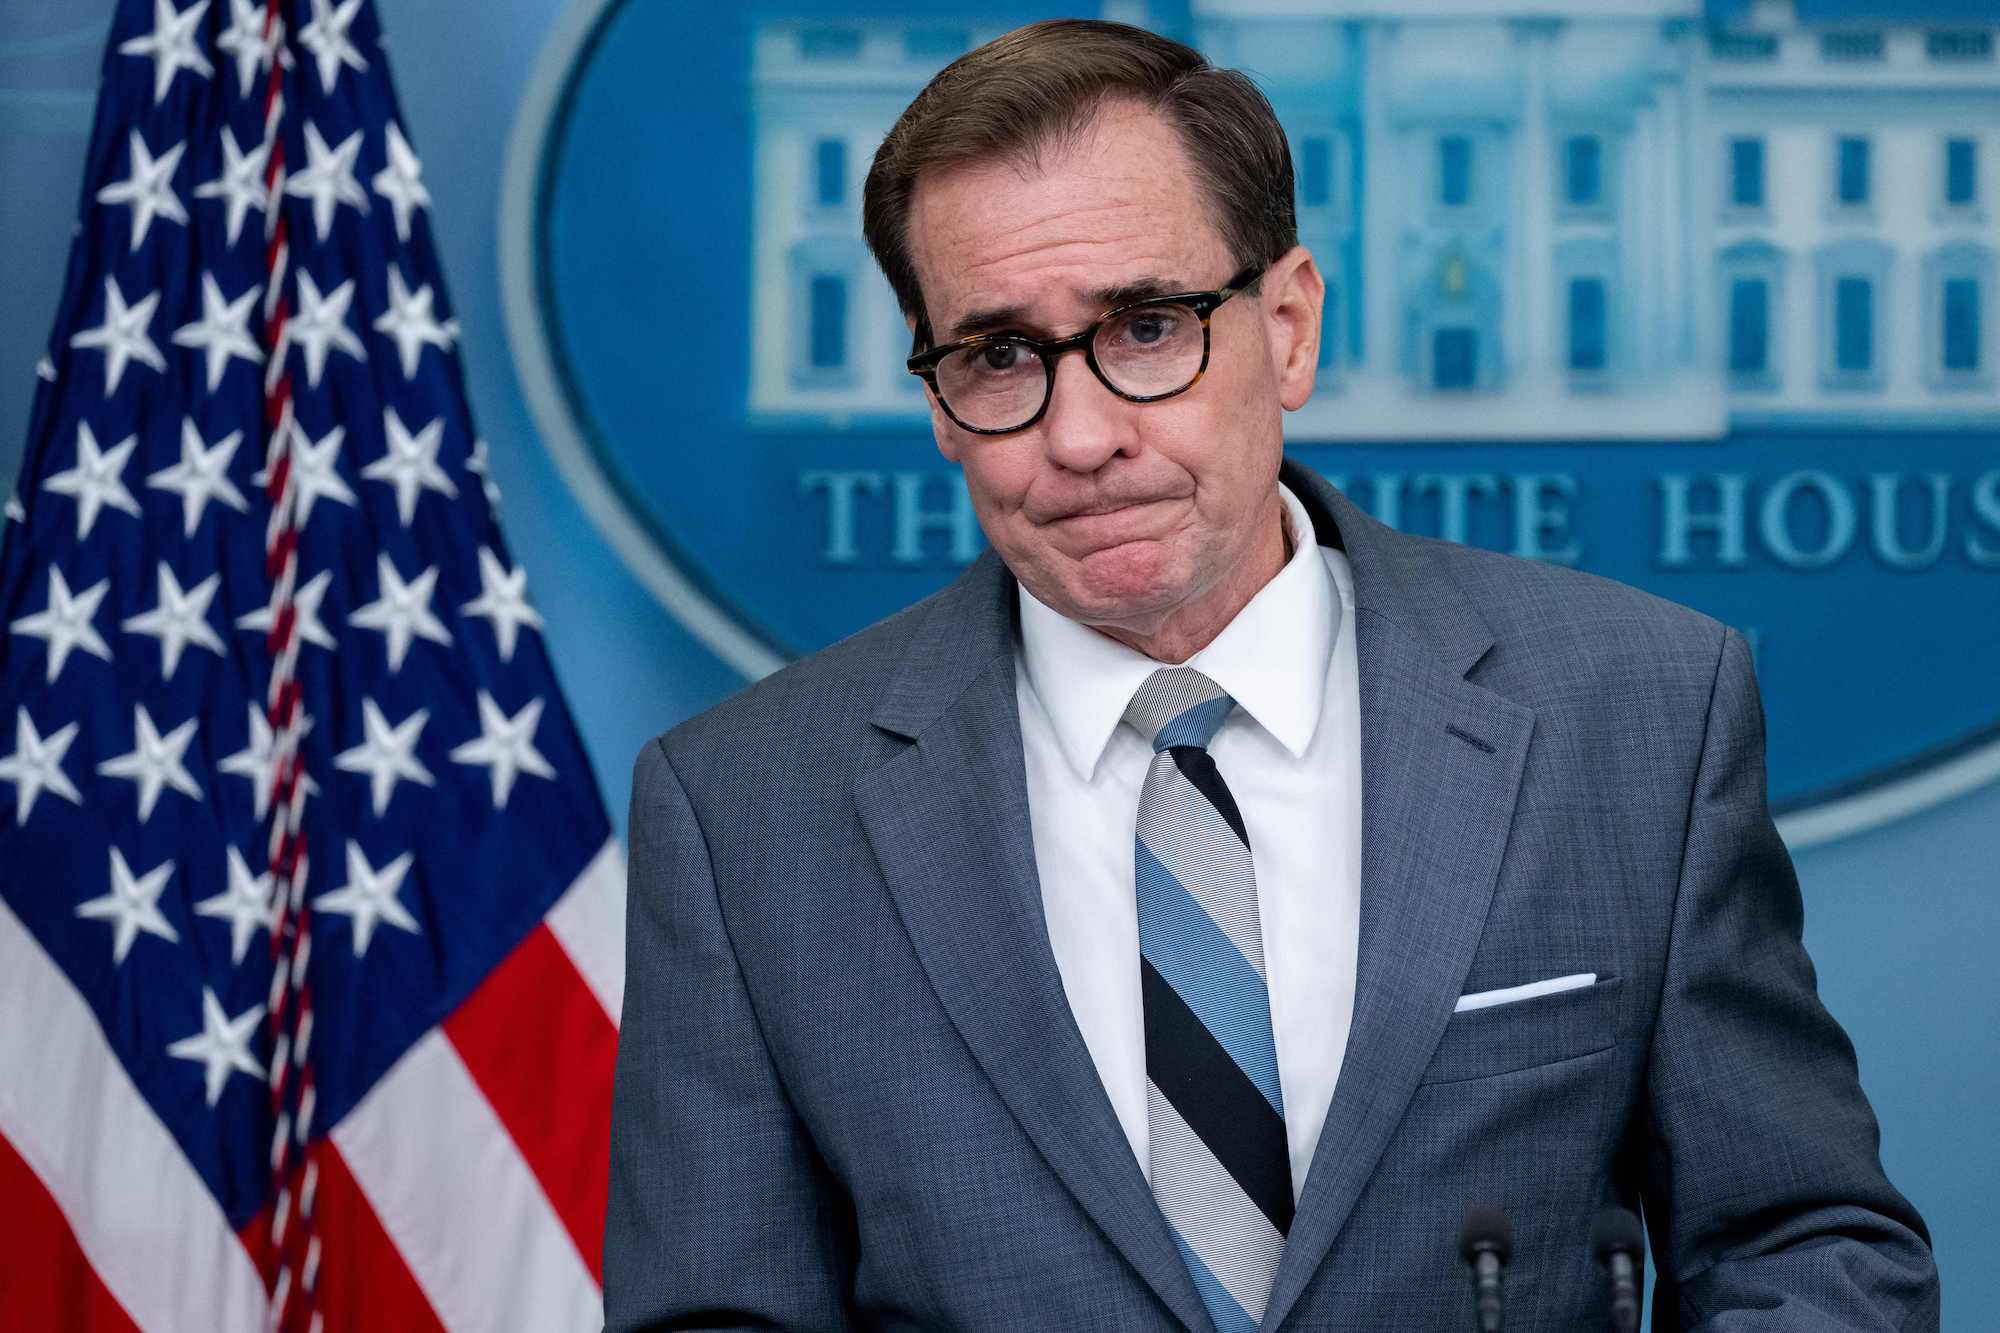 National Security Council Coordinator for Strategic Communications, John Kirby, speaks the daily White House briefing in Washington, DC on September 16.